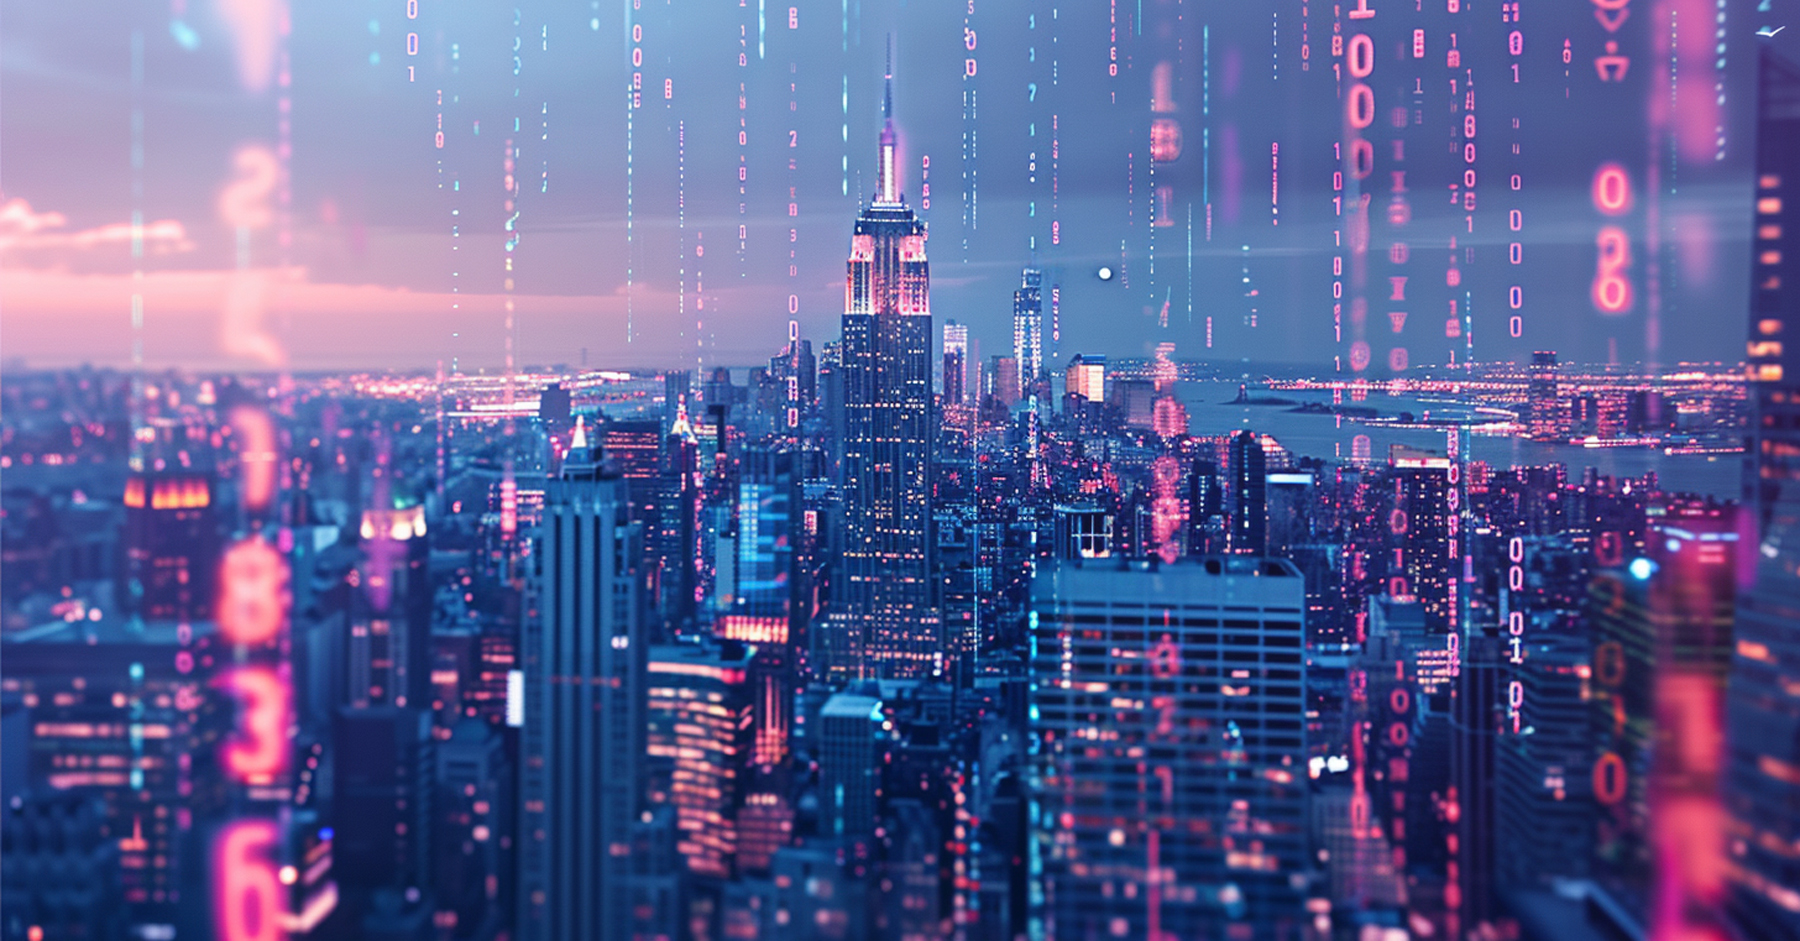 Financial services GenAI iconography overlaid on an image of a busy cityscape